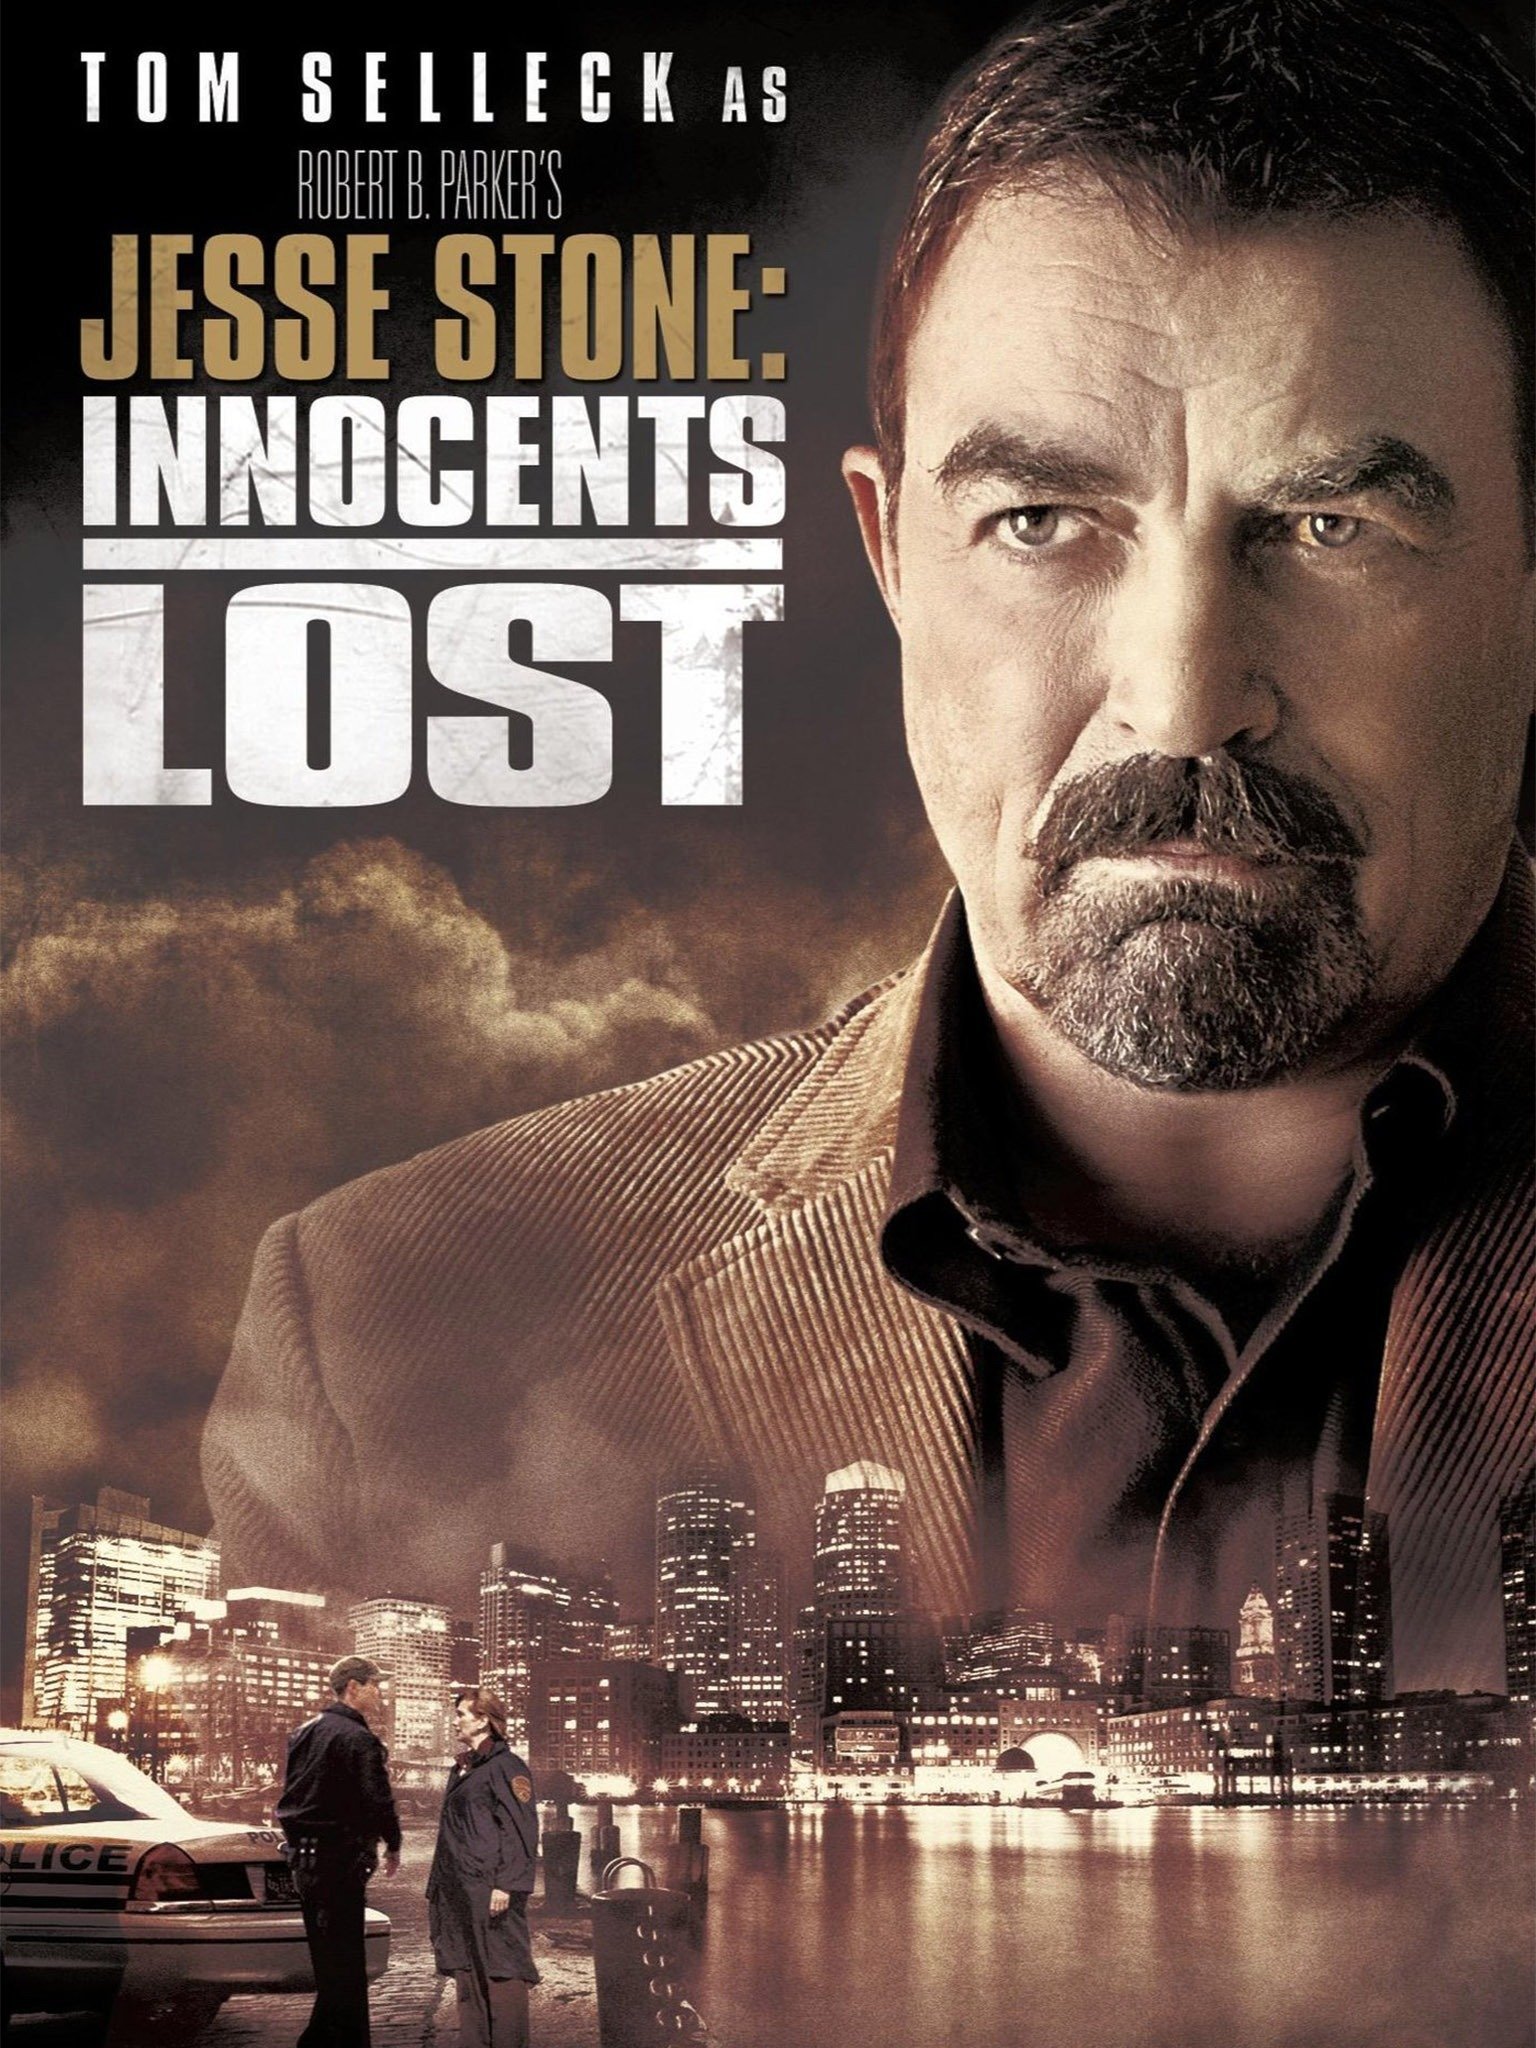 Jesse Stone: Innocents Lost Pictures - Rotten Tomatoes